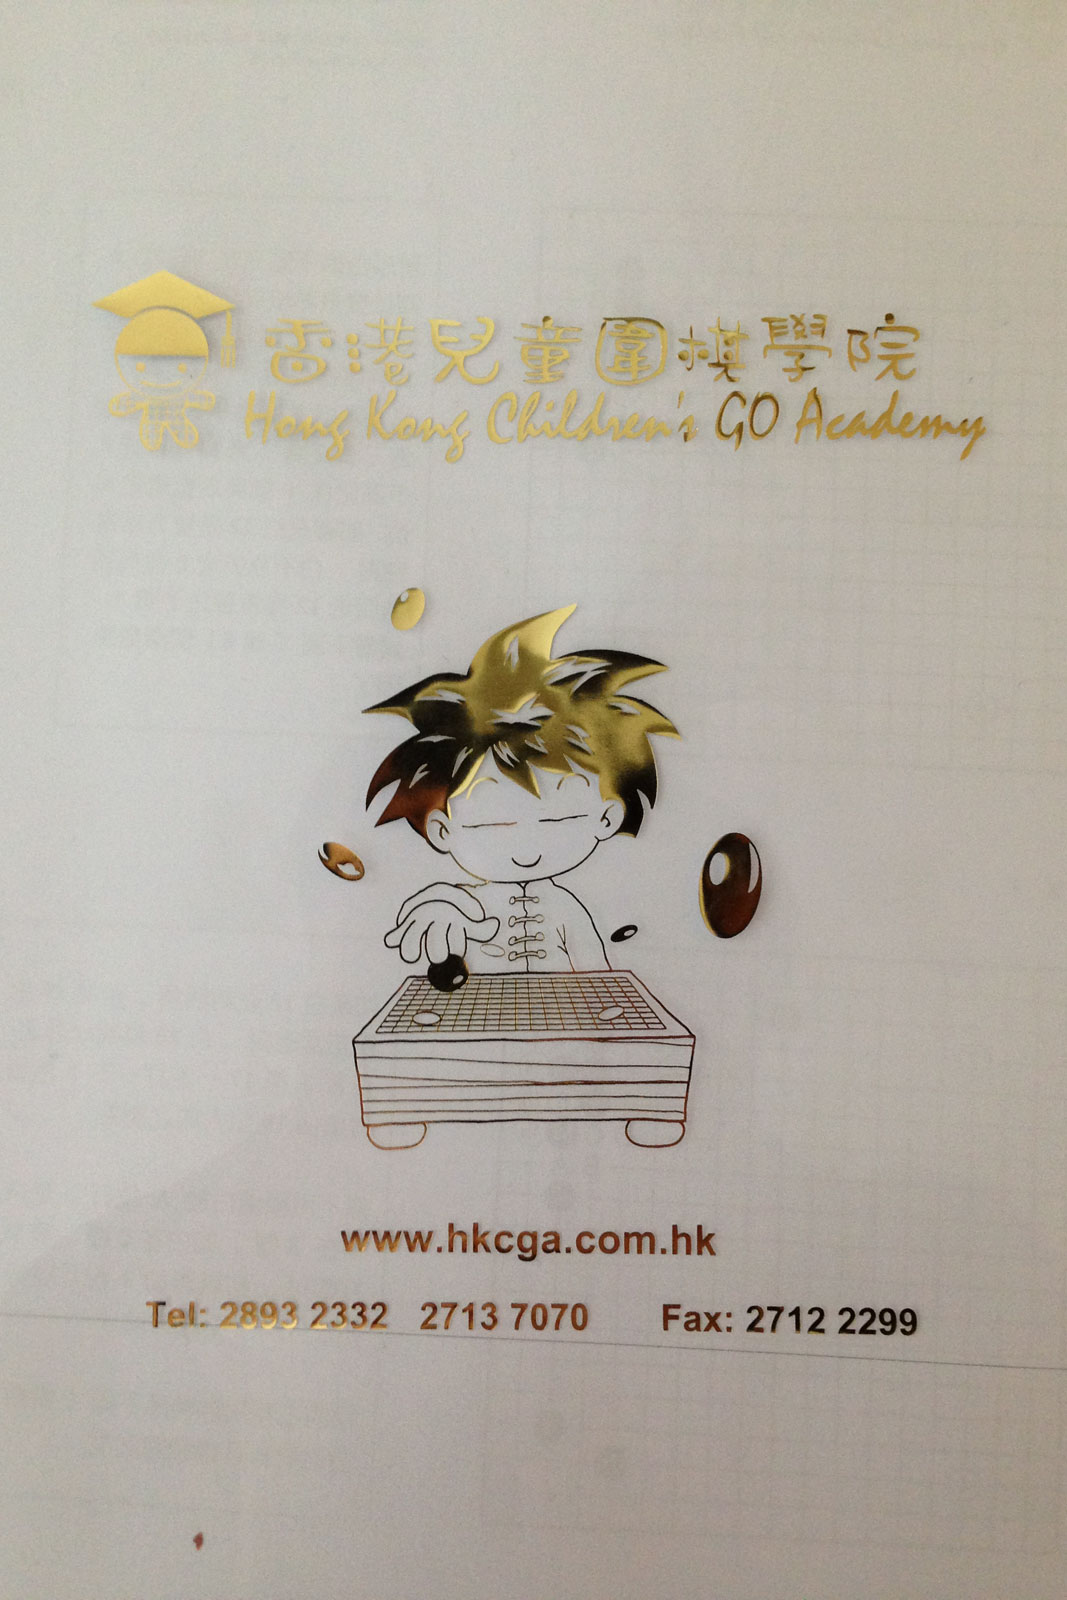 A clear go folder with the HKGA cartoon mascot on front!